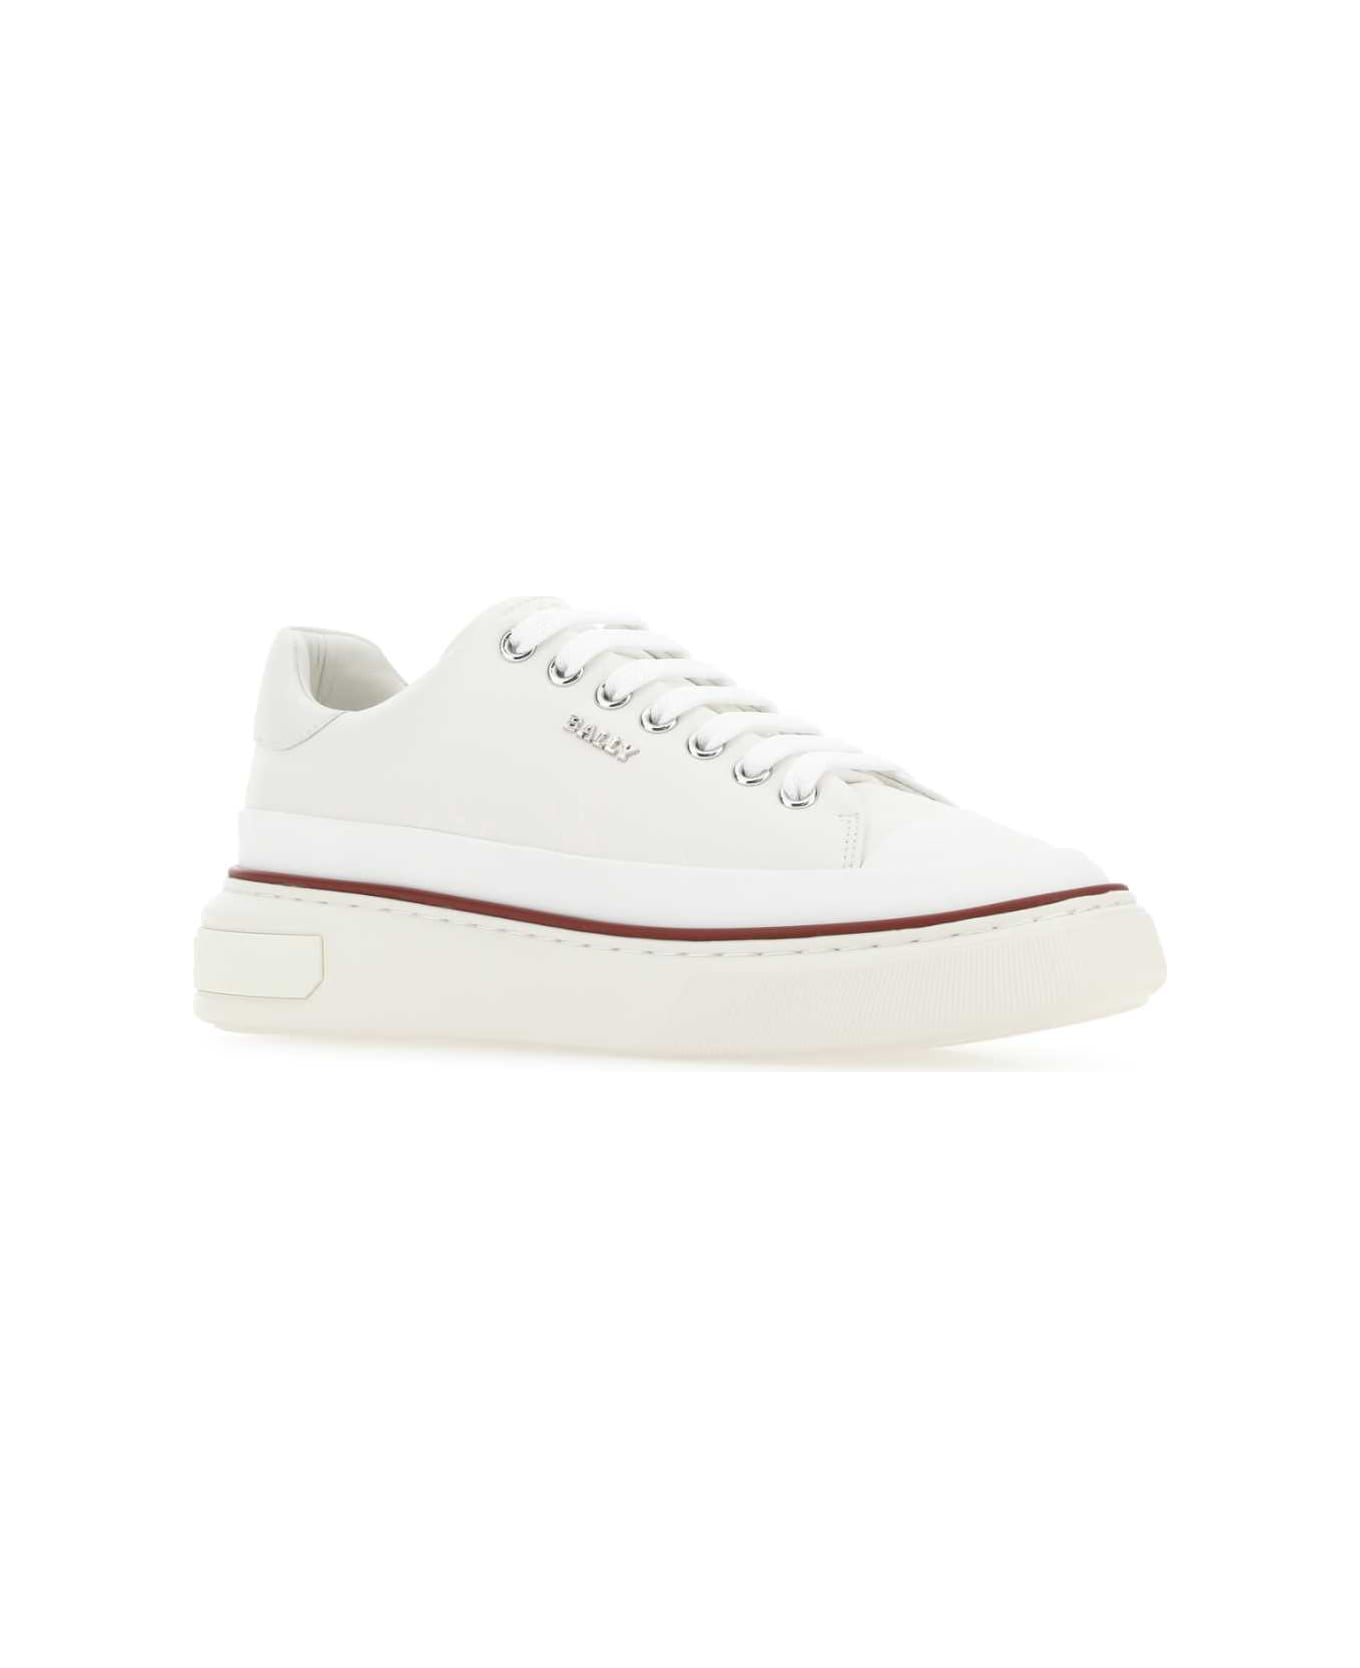 Bally Ivory Leather Maily Sneakers - White